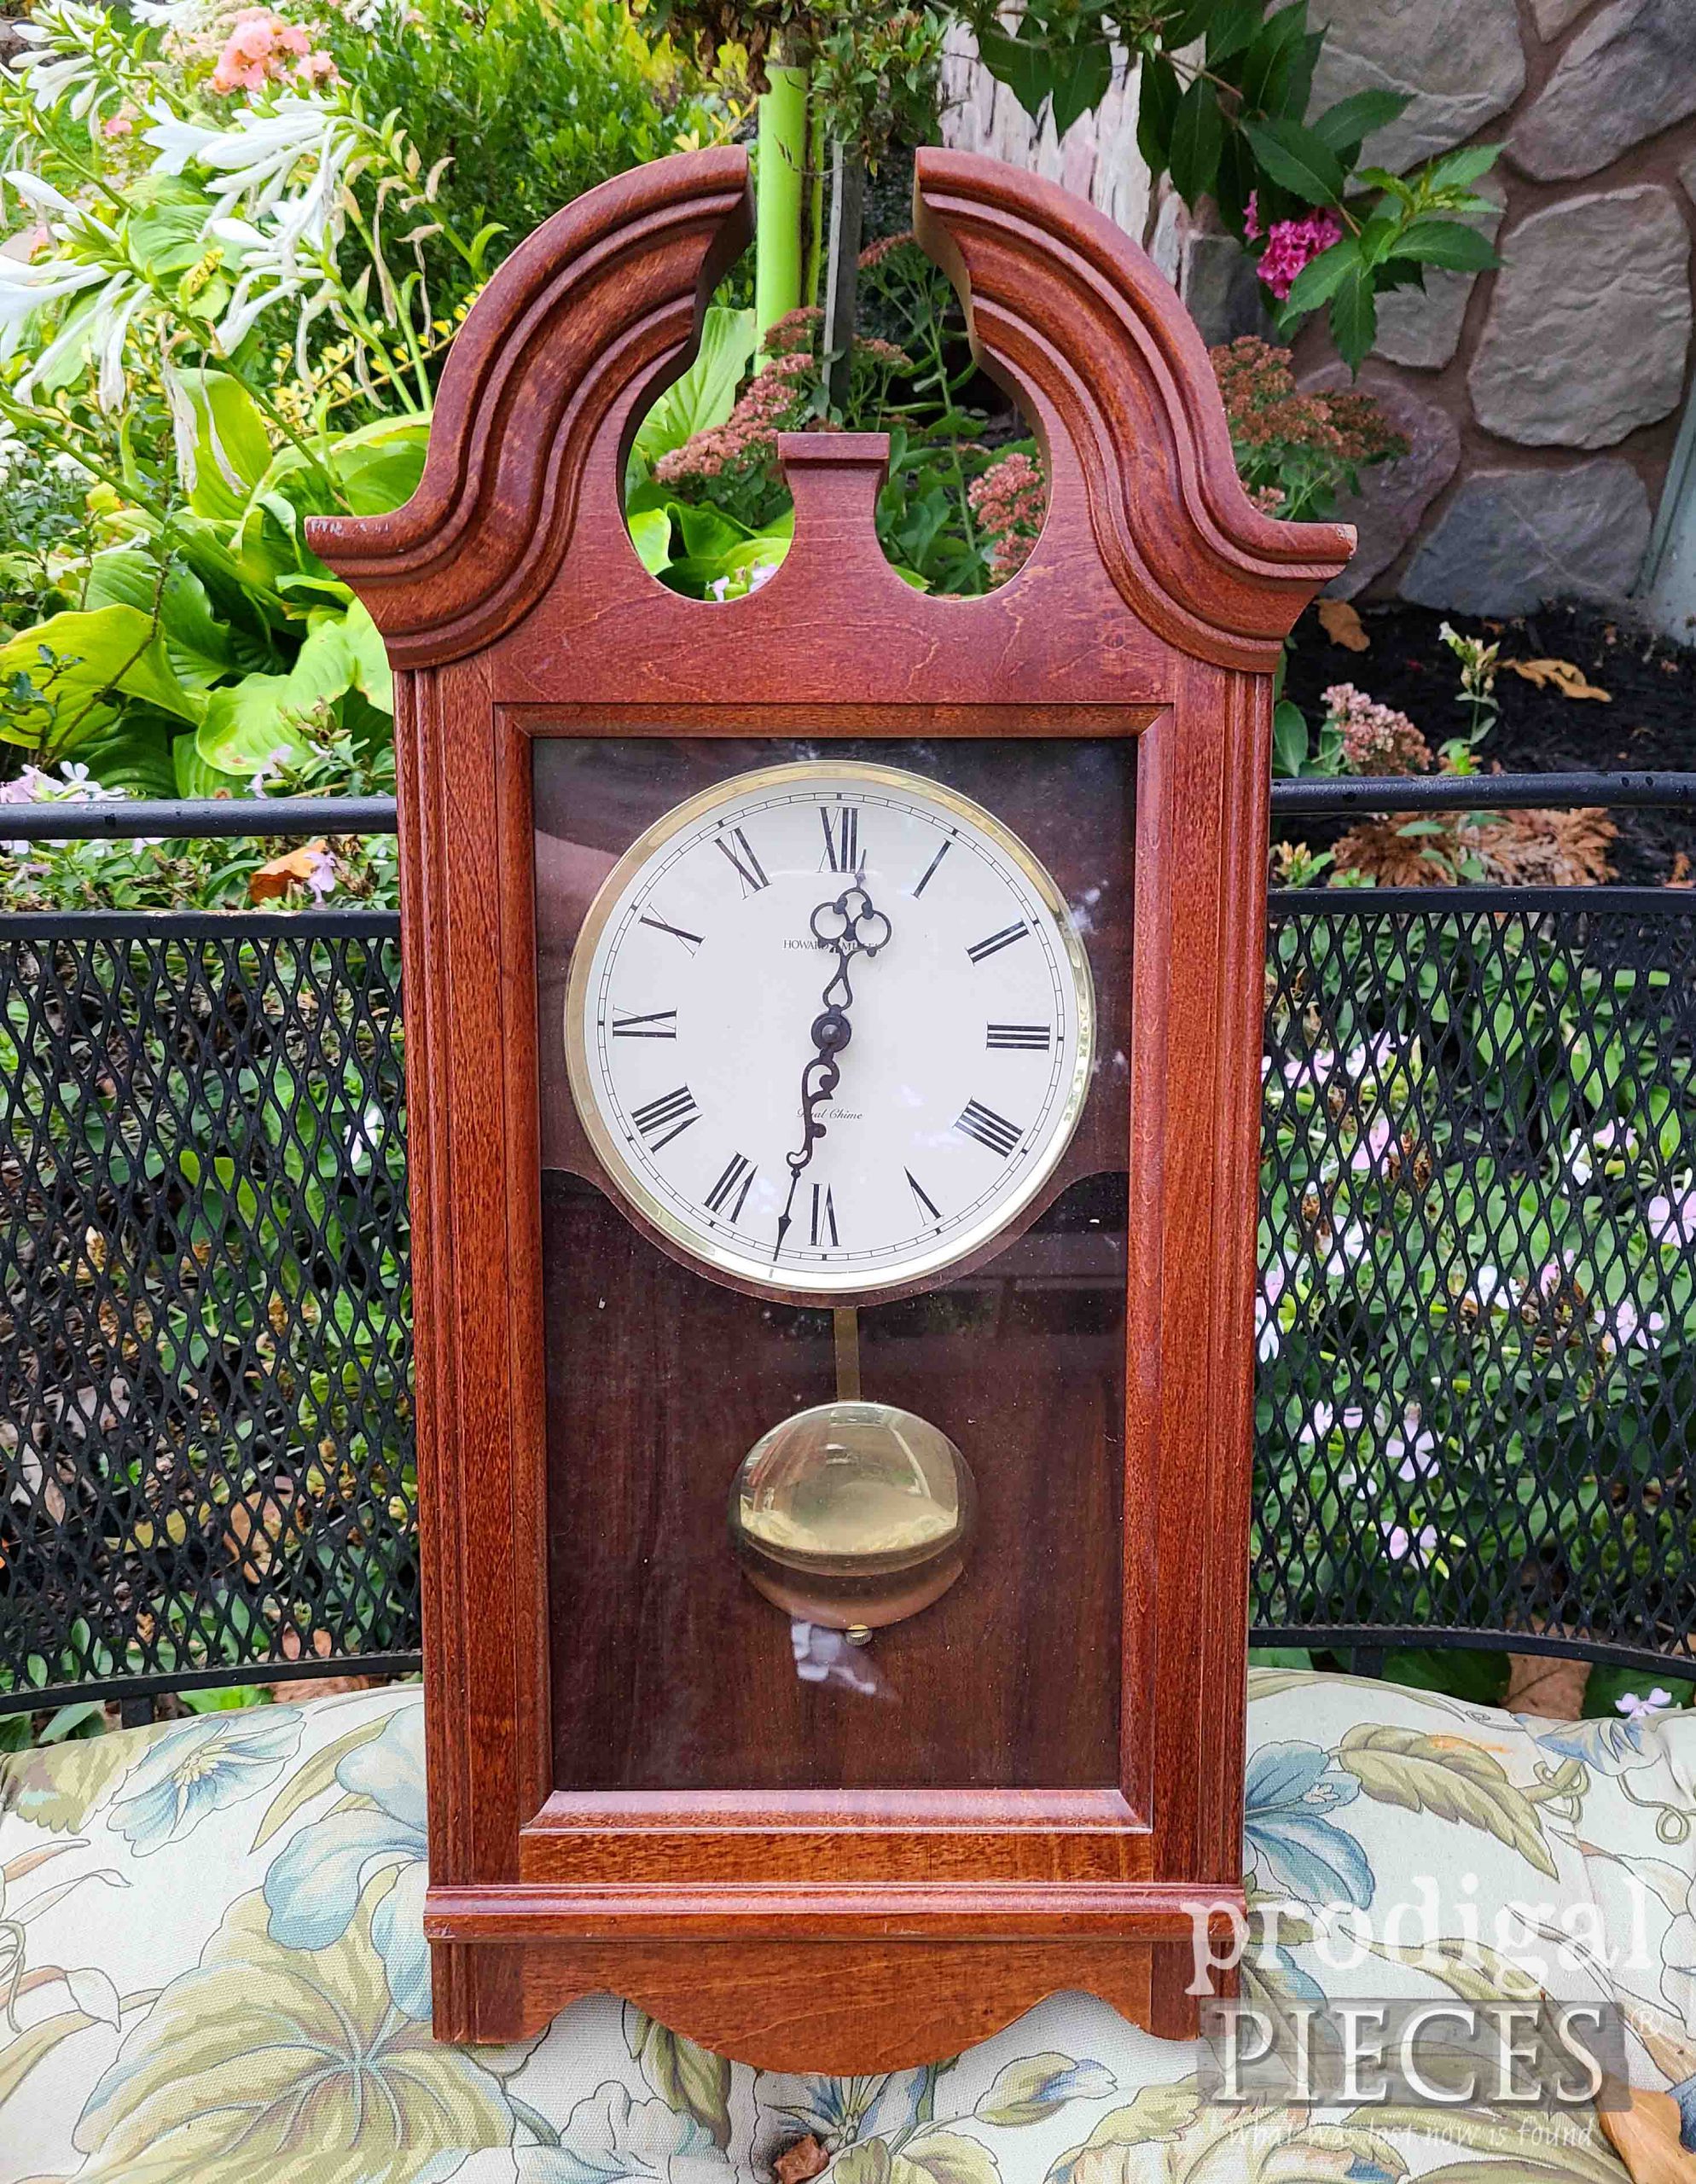 Vintage Wall Clock Before Upcycle by Larissa of Prodigal Pieces | prodigalpieces.com #prodigalpieces